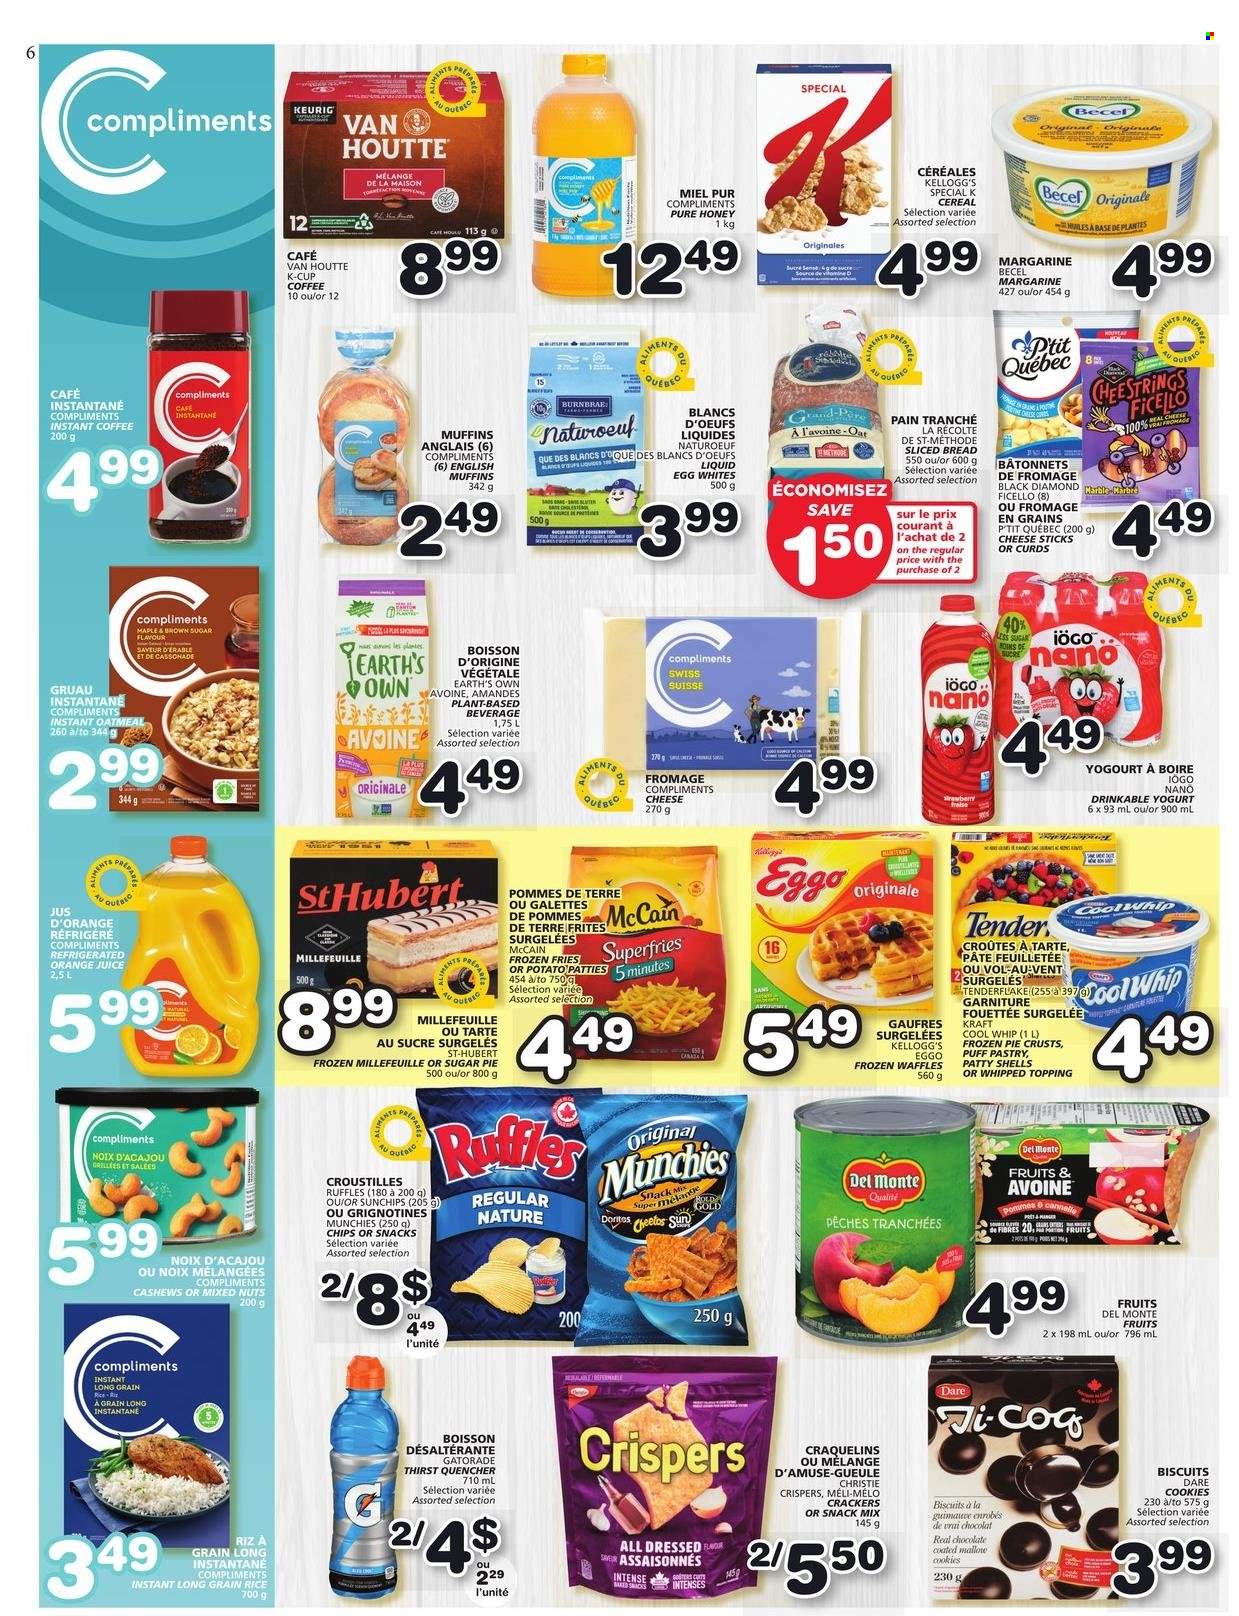 thumbnail - Les Marchés Tradition Flyer - March 16, 2023 - March 22, 2023 - Sales products - bread, english muffins, pie, waffles, Kraft®, string cheese, cheese, yoghurt, eggs, margarine, Cool Whip, puff pastry, cheese sticks, McCain, potato fries, cookies, chocolate, crackers, Kellogg's, biscuit, Doritos, Cheetos, Ruffles, cane sugar, pie crust, oatmeal, topping, Del Monte, cereals, rice, long grain rice, honey, cashews, mixed nuts, orange juice, juice, Gatorade, coffee, instant coffee, coffee capsules, K-Cups, Keurig. Page 6.